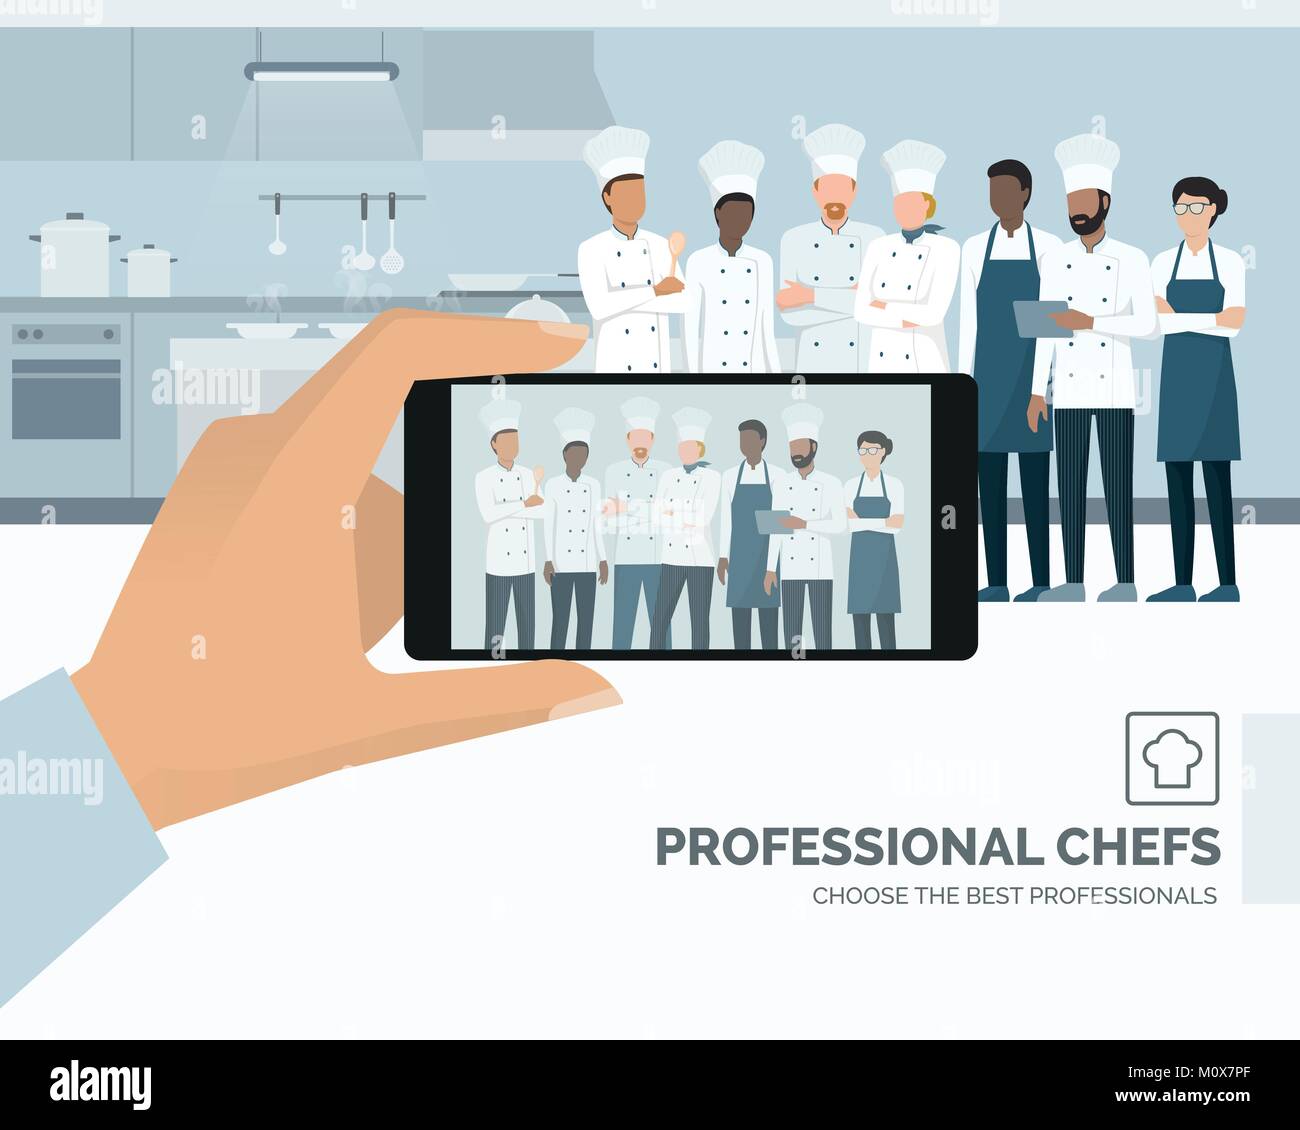 Professional chefs posing in the restaurant kitchen, a man is taking a picture using a smartphone, subjective point of view Stock Vector